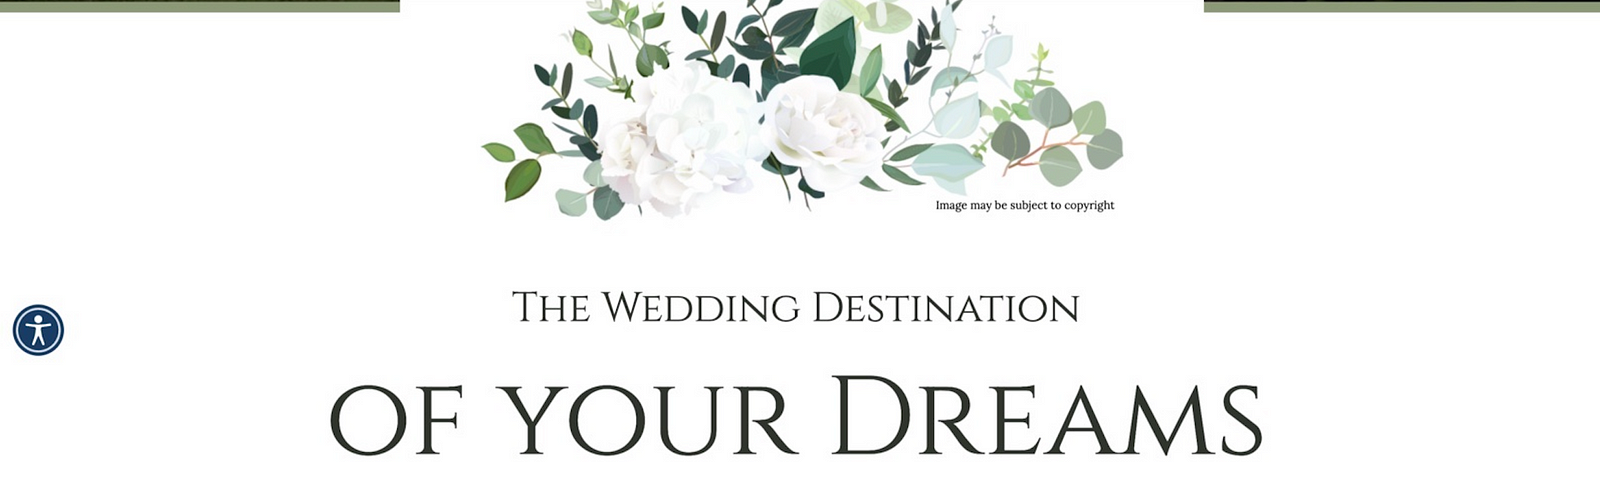 screenshot of website from Desert Plantation advertising wedding venue, which is to take place on a former slave plantation